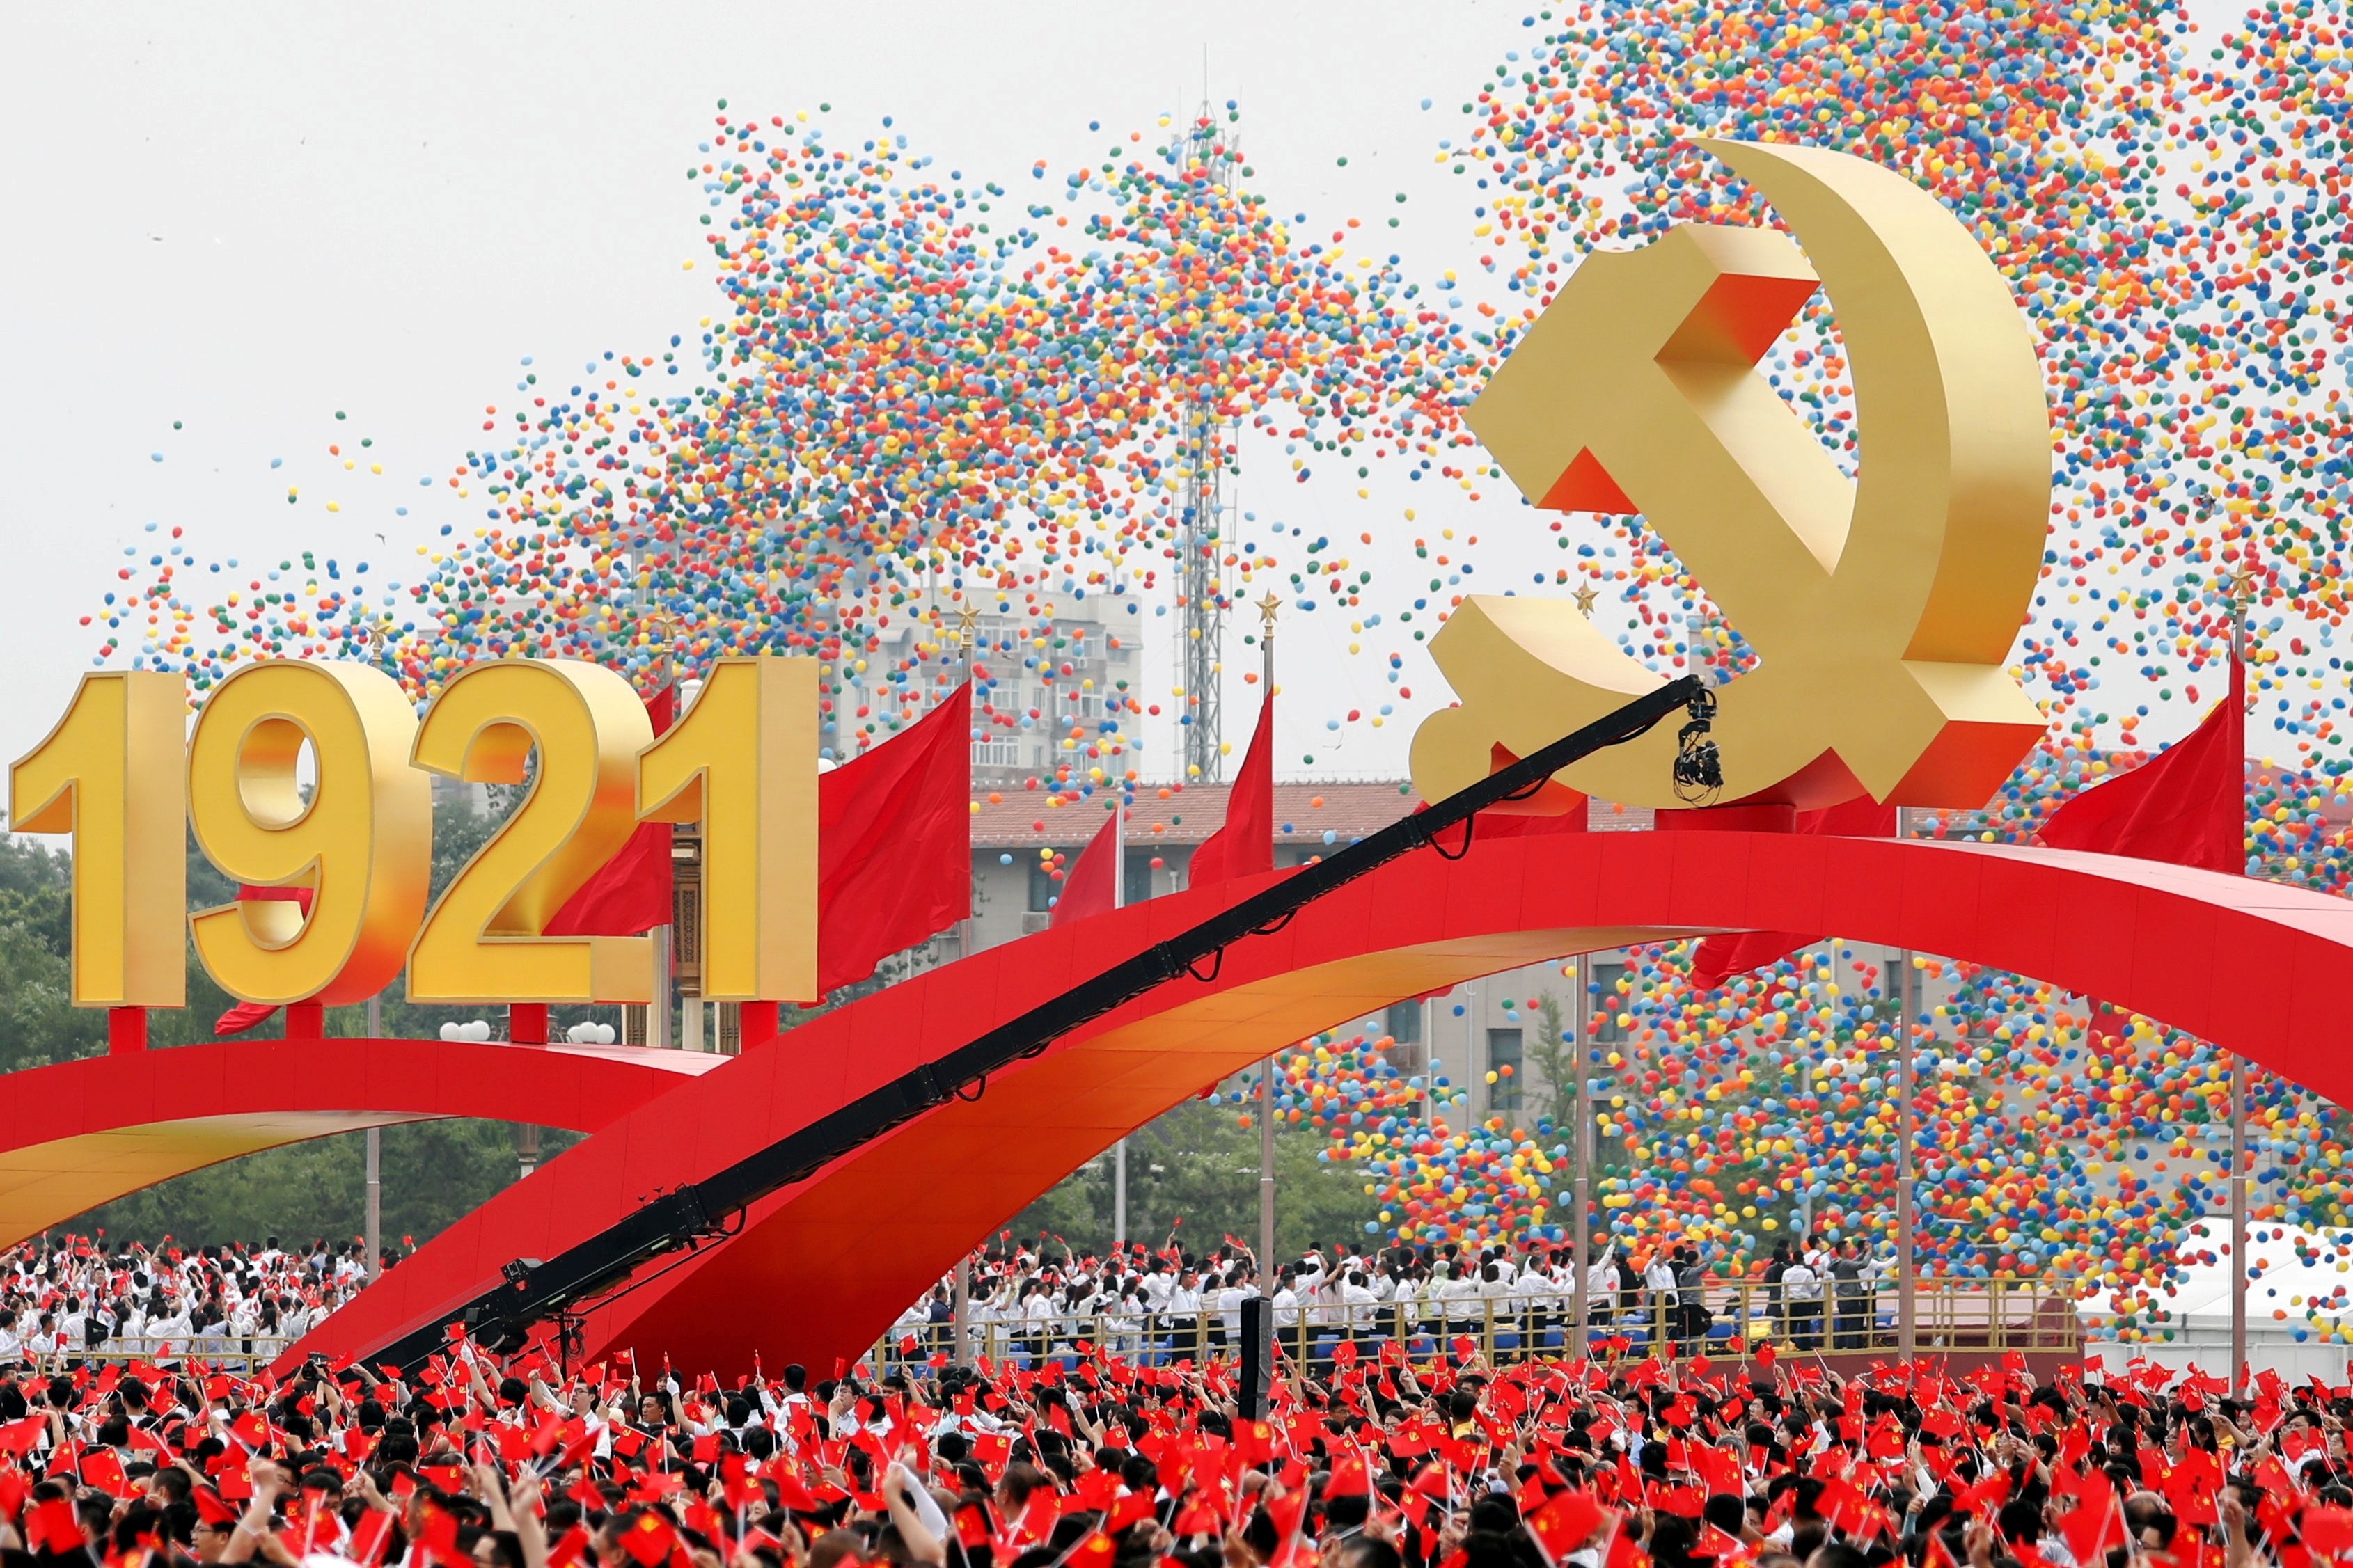 The 100th founding anniversary of the Communist Party of China in Beijing